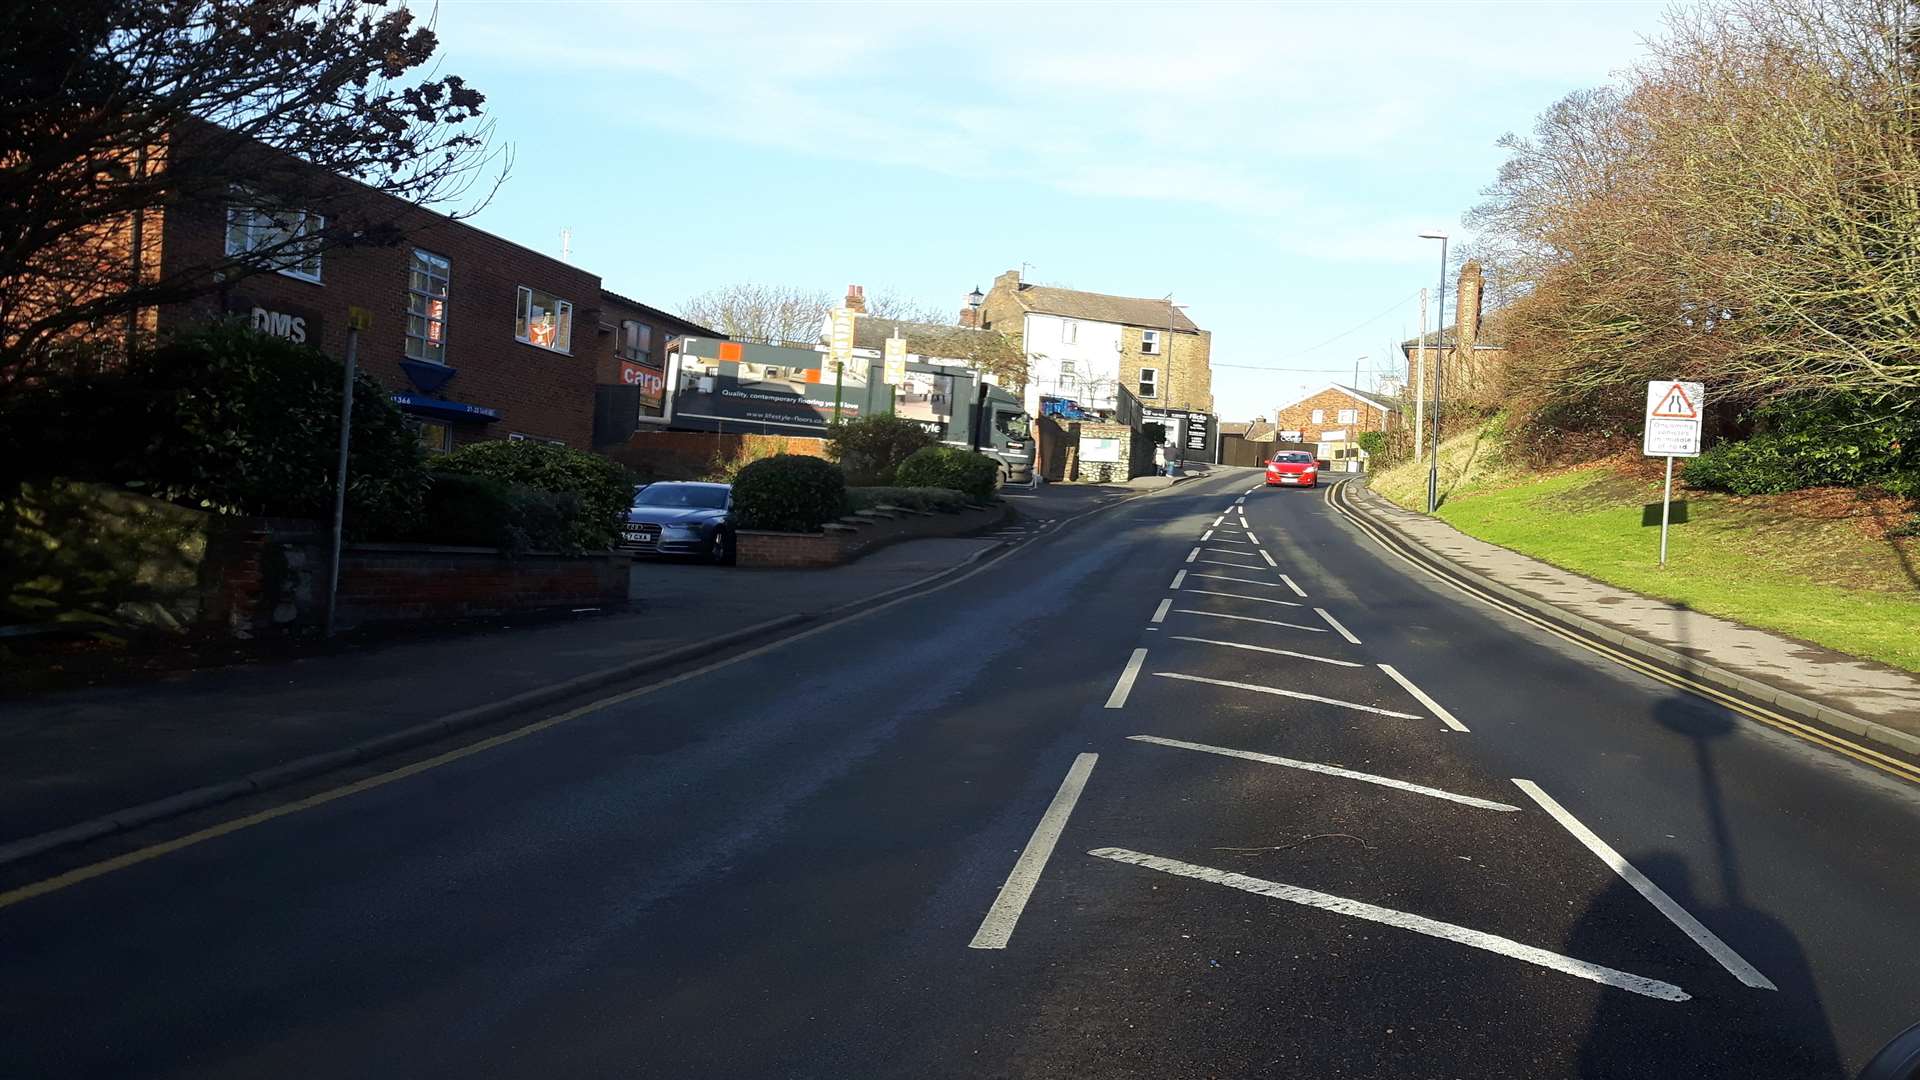 Looking up Tovil Hill towards the Church Street junction